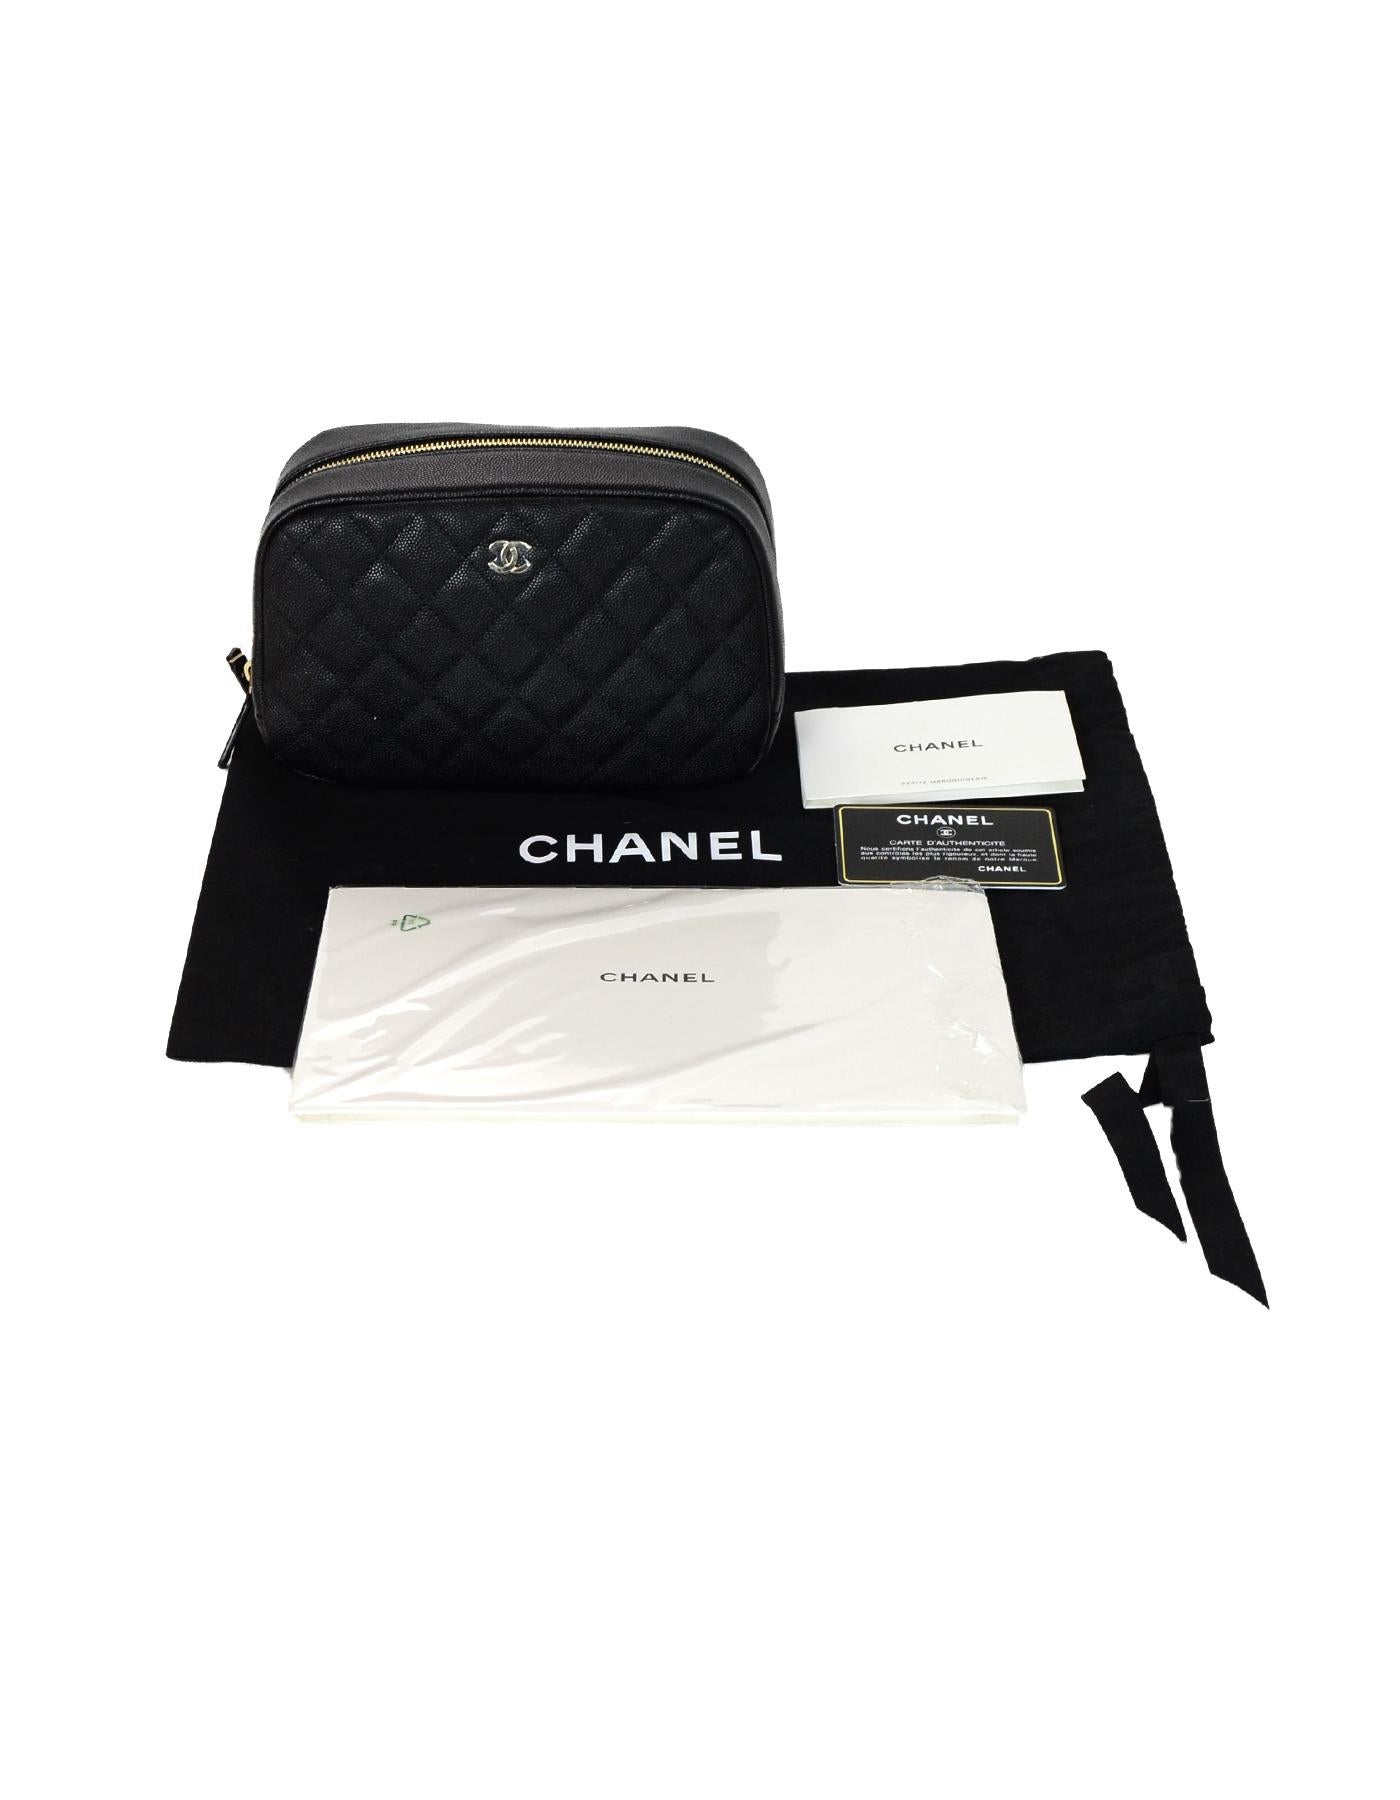 Chanel '18 Black Caviar Leather Curvy Classic Pouch Cosmetic Bag  2